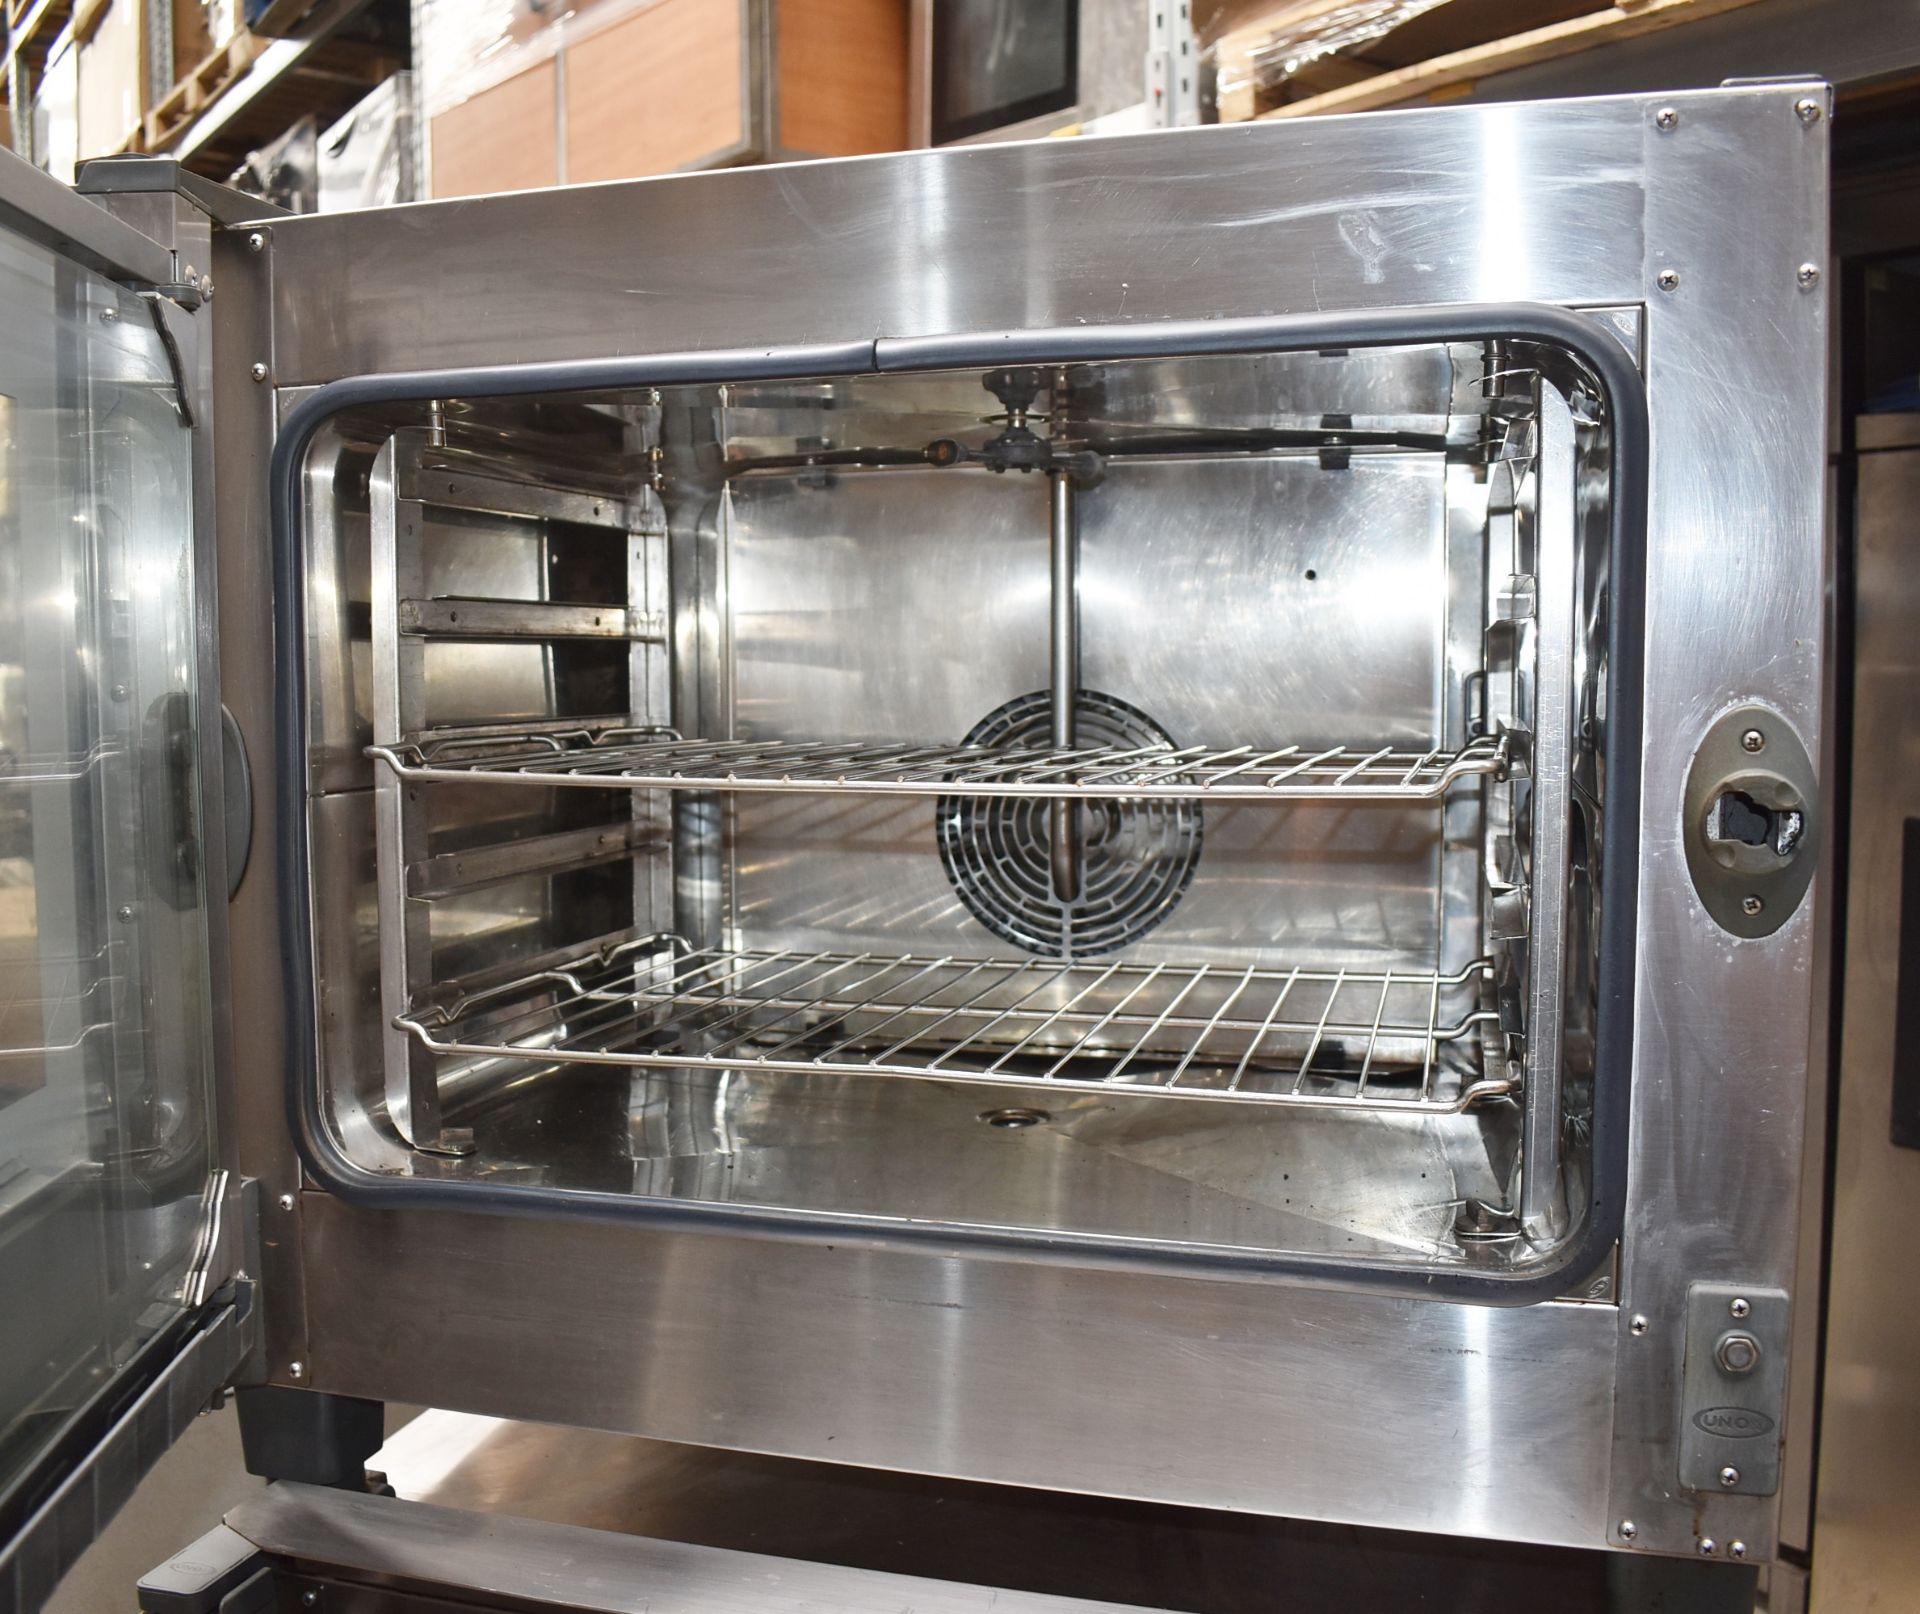 1 x Unox ChefTop XVL385 Commercial 3 Phase Double Oven For Slow Cooking Meats, Proving Dough & More - Image 17 of 26